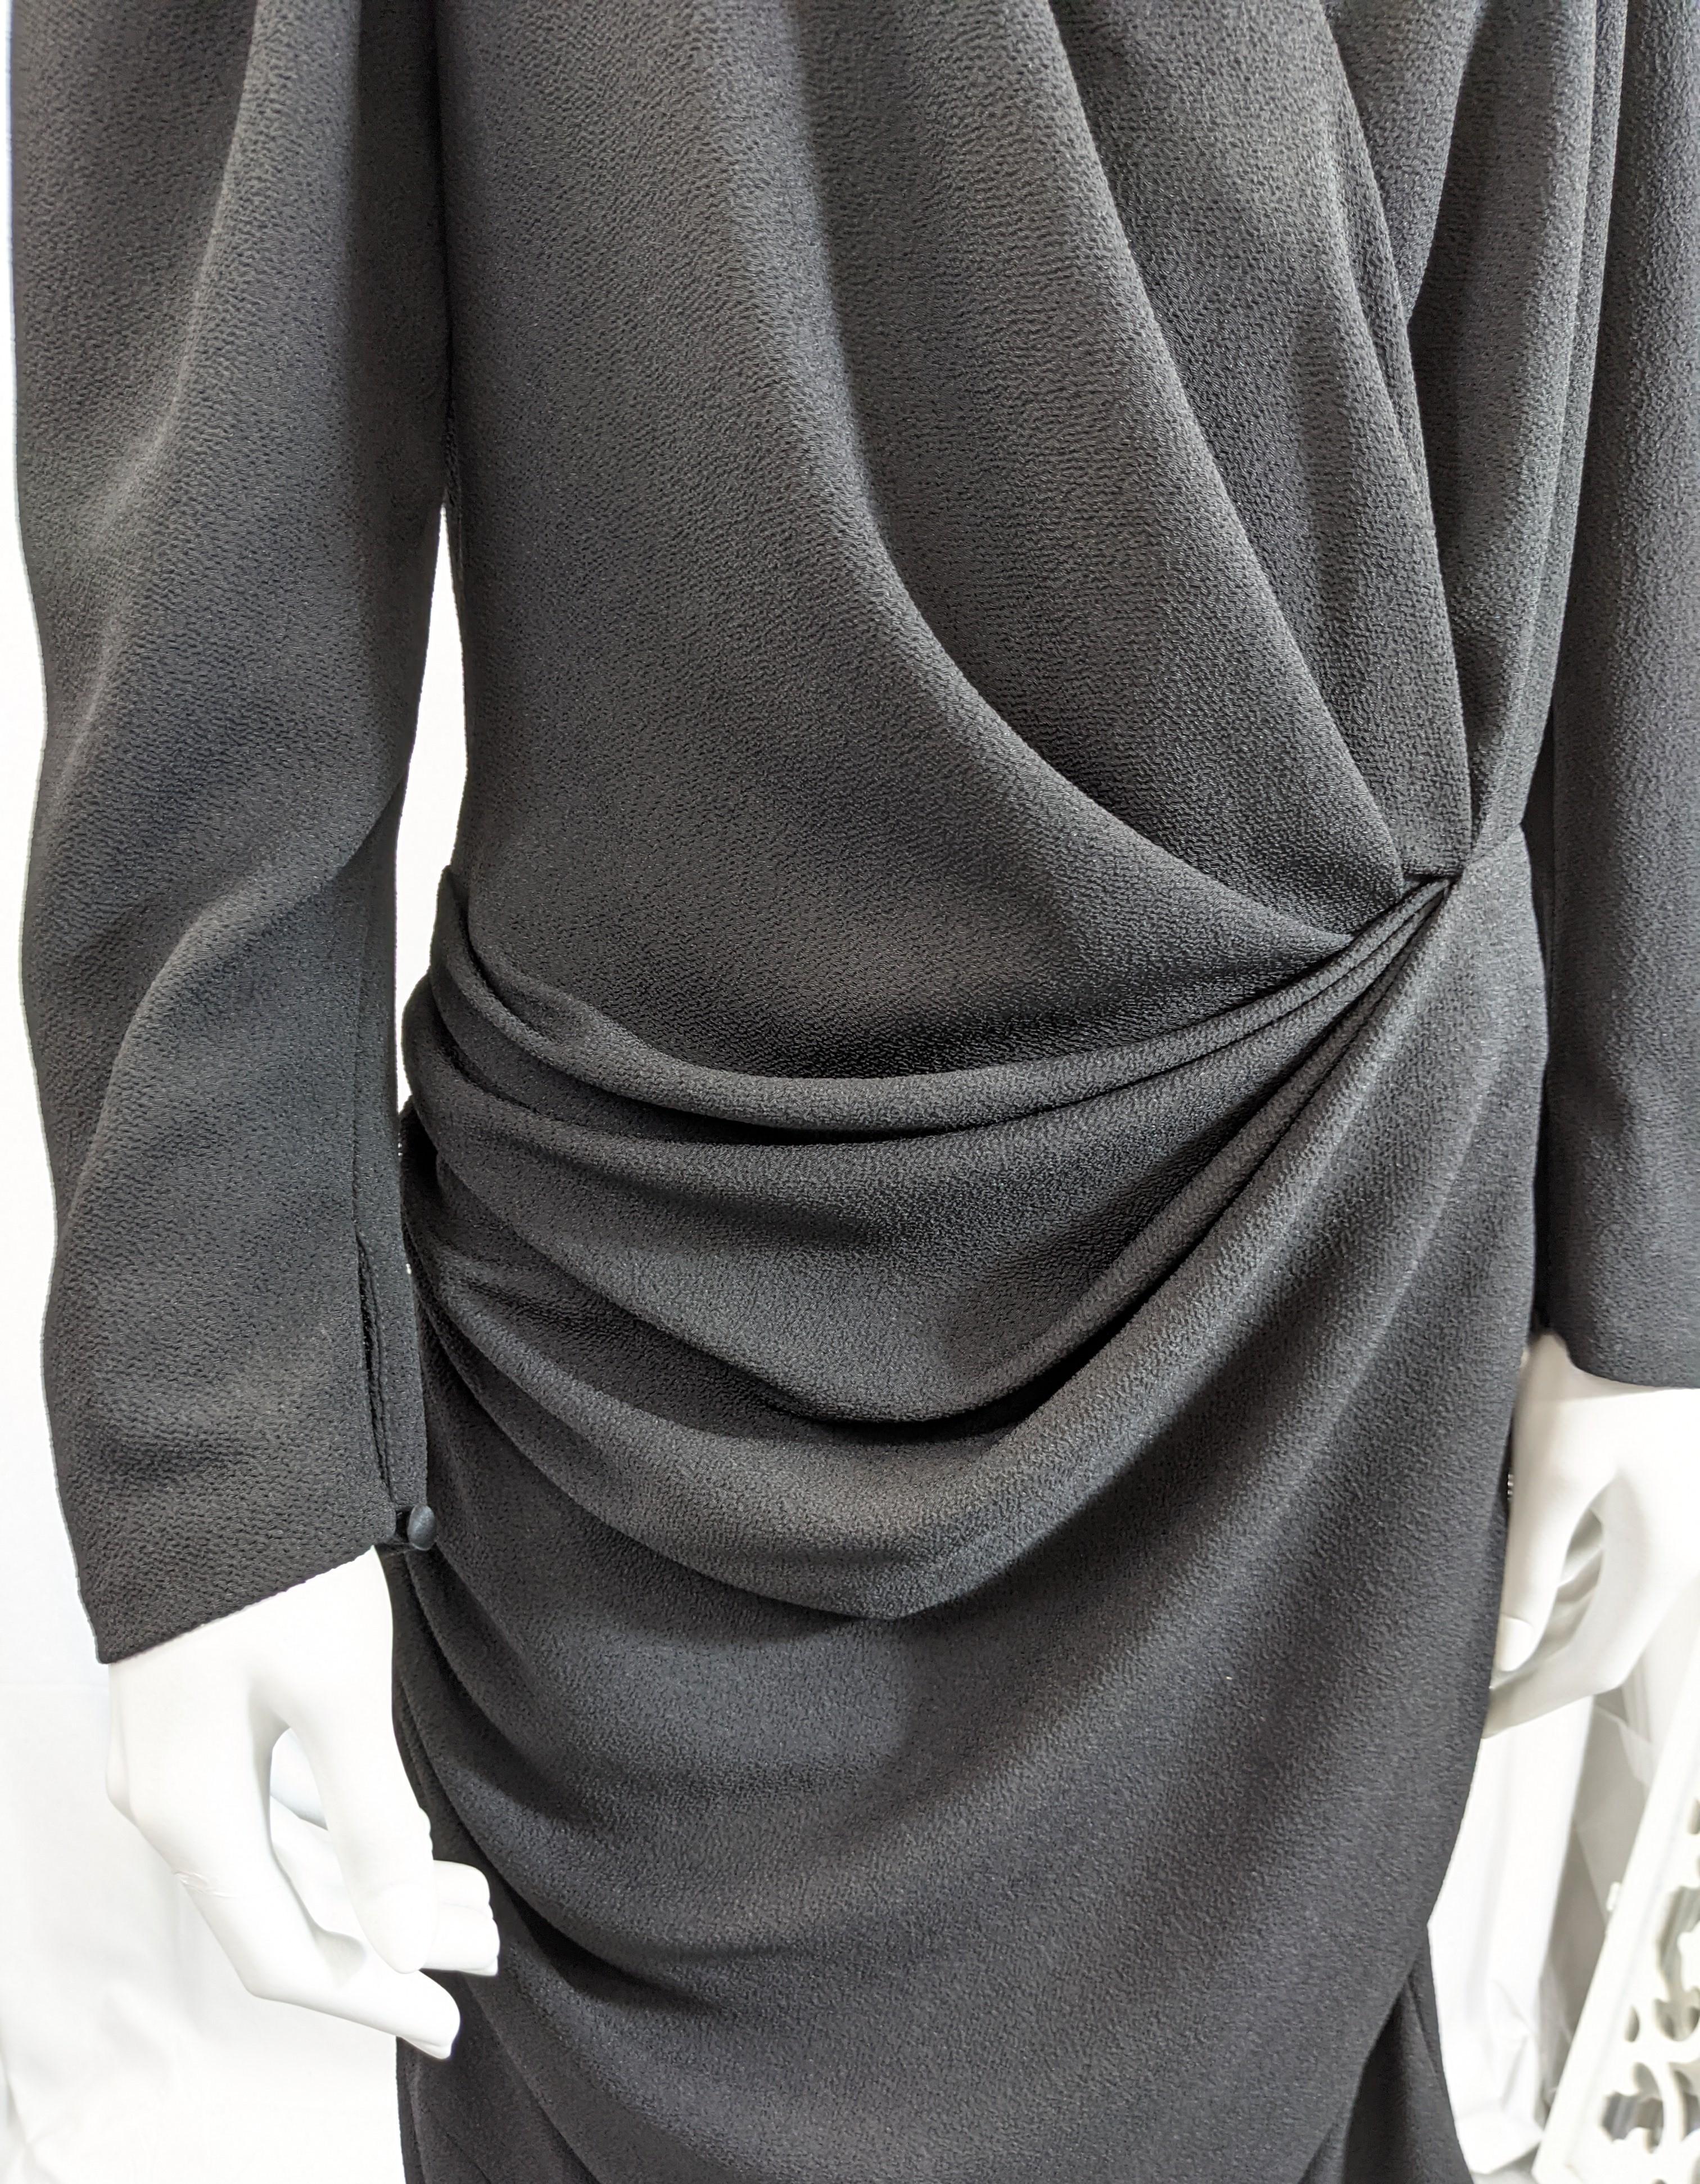 Balenciaga Draped Jersey Dress In Excellent Condition For Sale In New York, NY